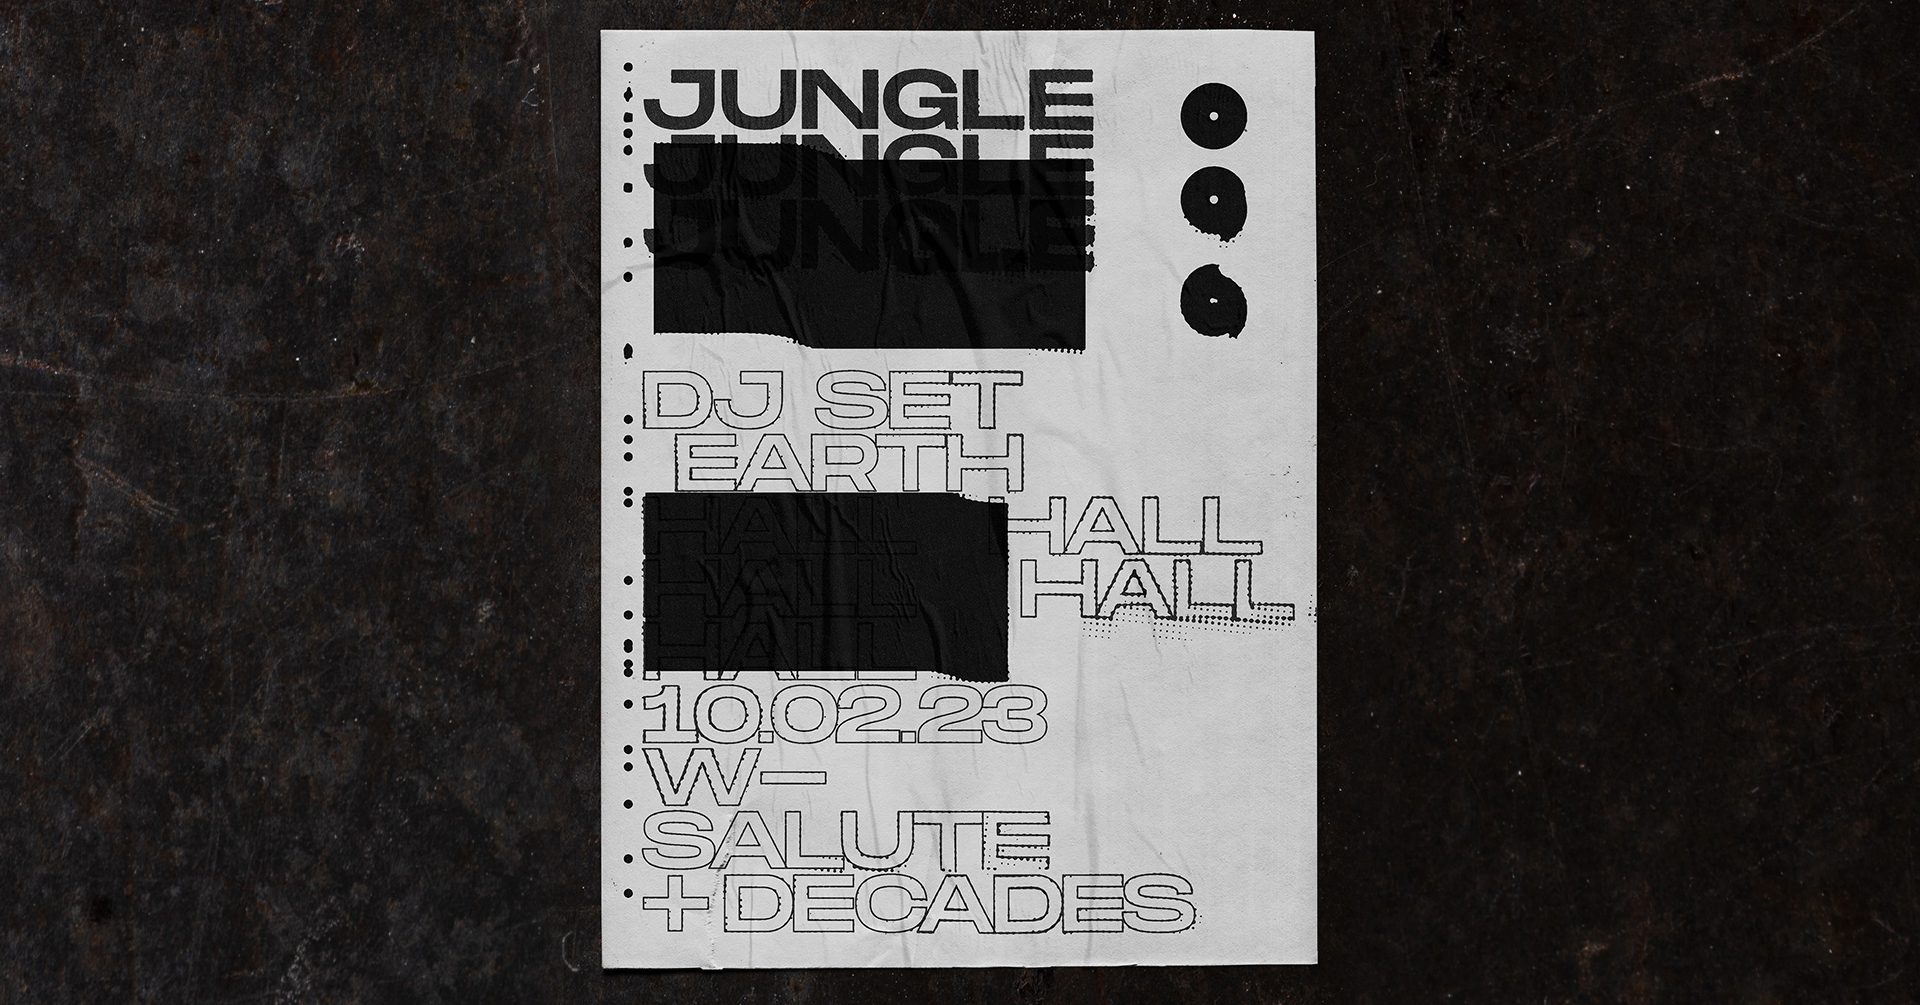 Jungle extended set, salute and Decades at EartH